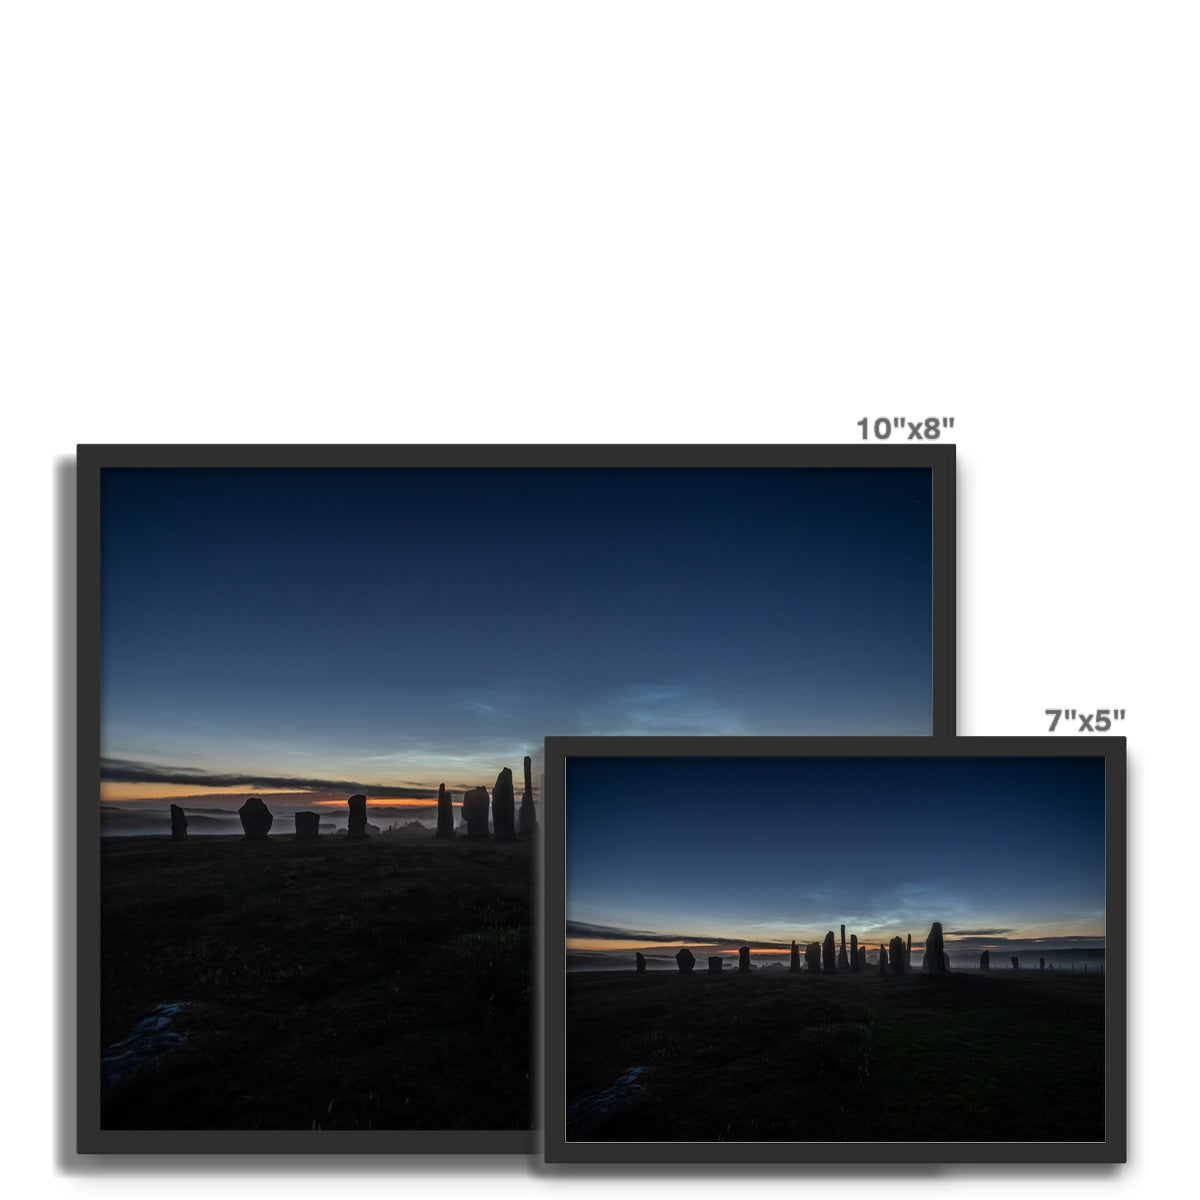 Callanish Stones and Noctilucent Clouds Framed Photo Tile